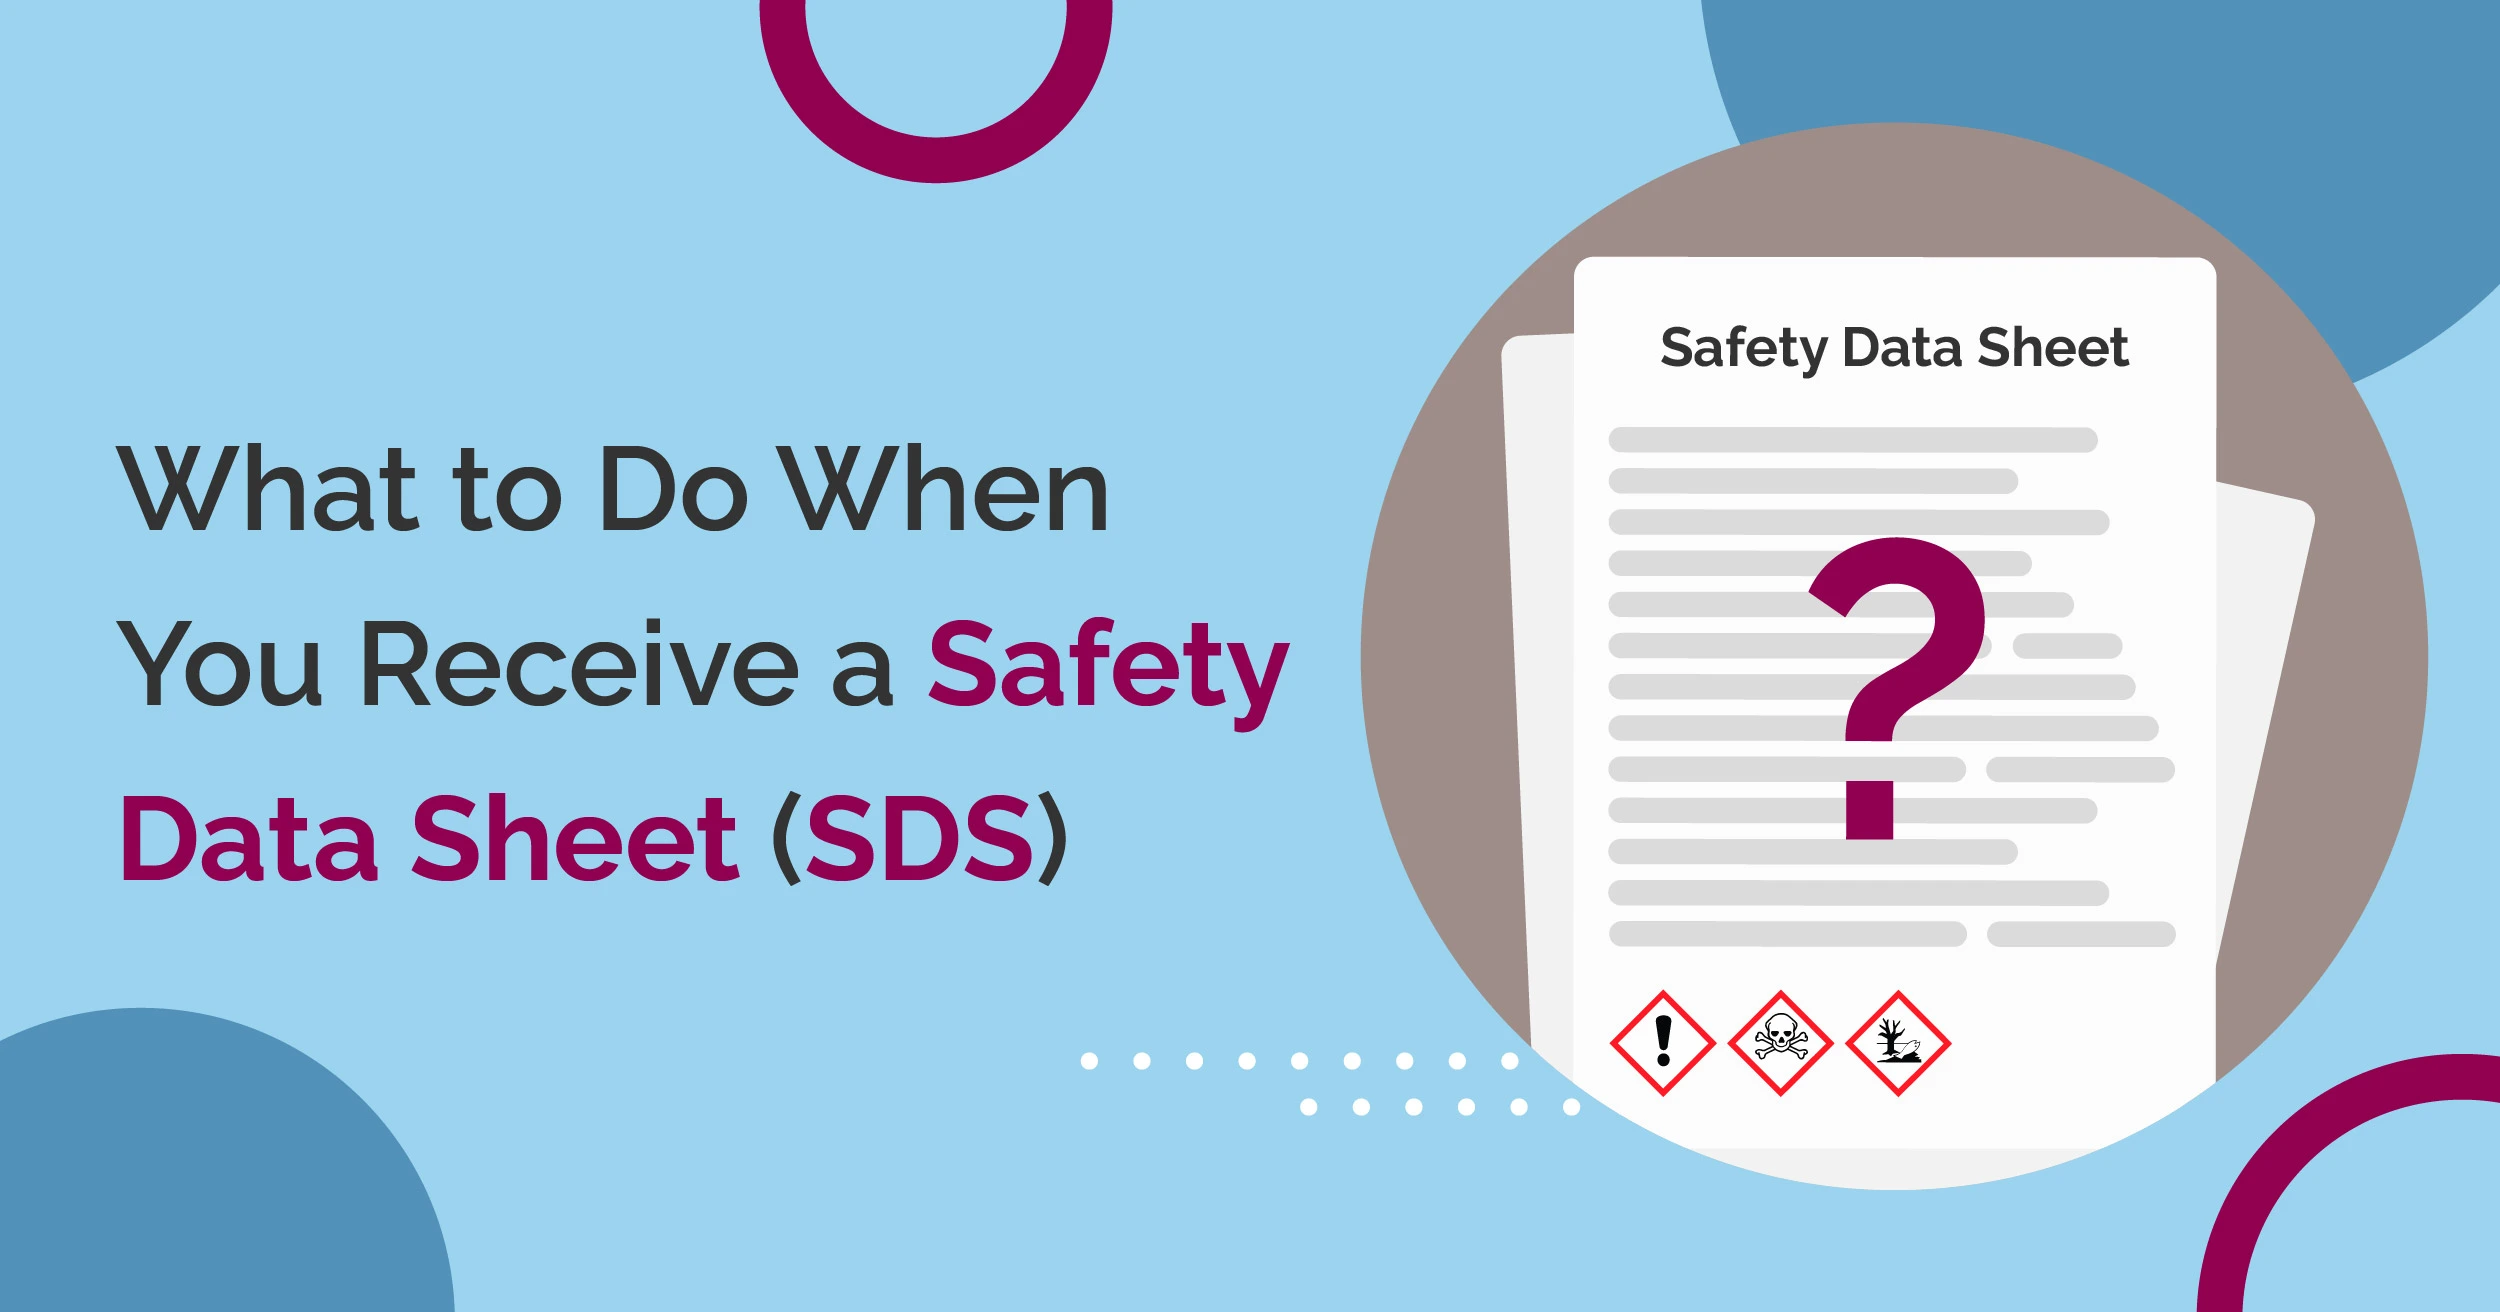 What to Do When You Receive a Safety Data Sheet (SDS)